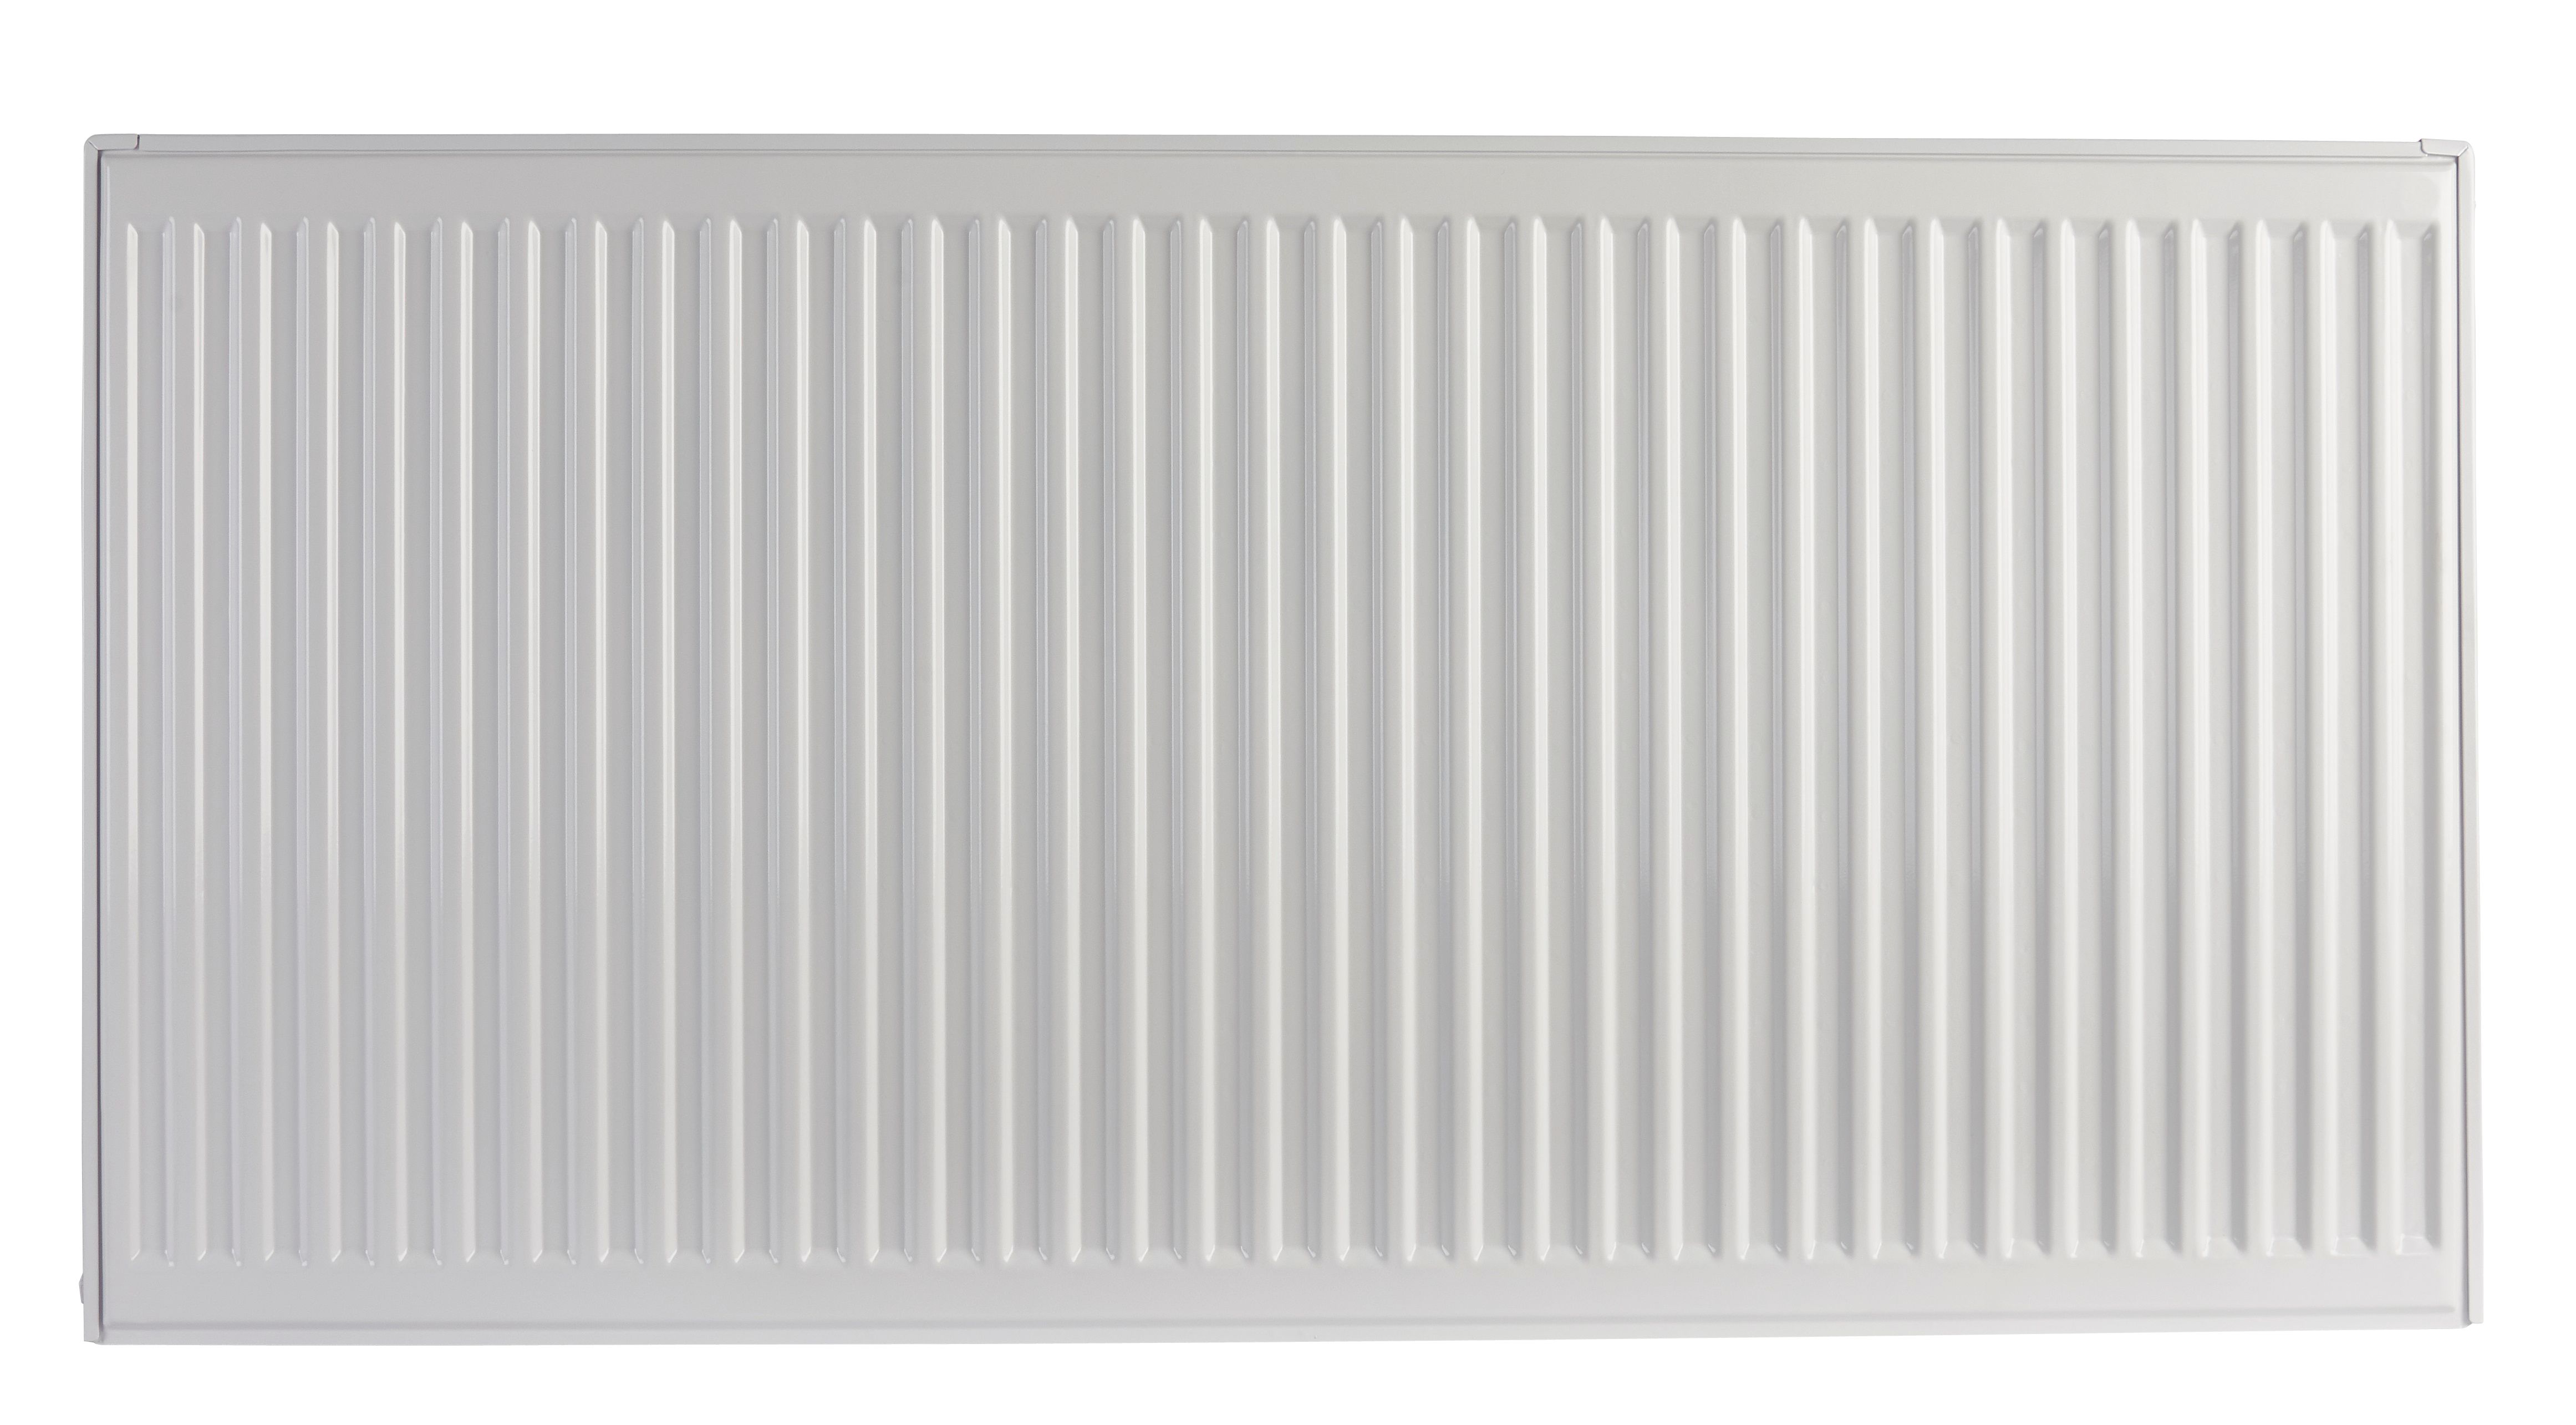 Image of Homeline by Stelrad 600 x 1200mm Type 11 Single Panel Single Convector Radiator